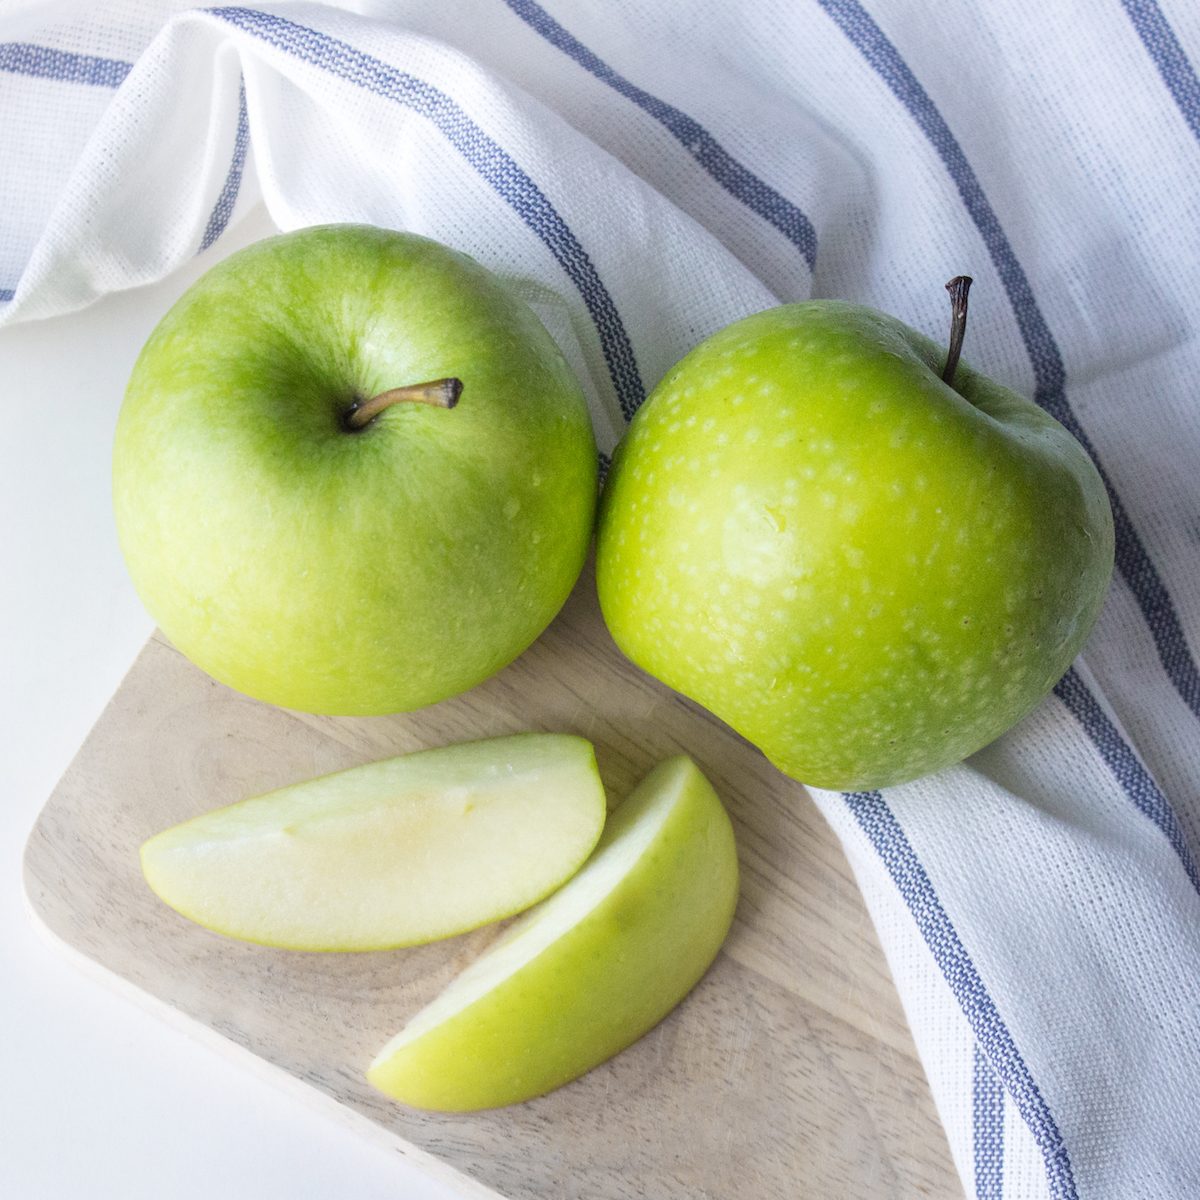 Ripe green apples and apple slices